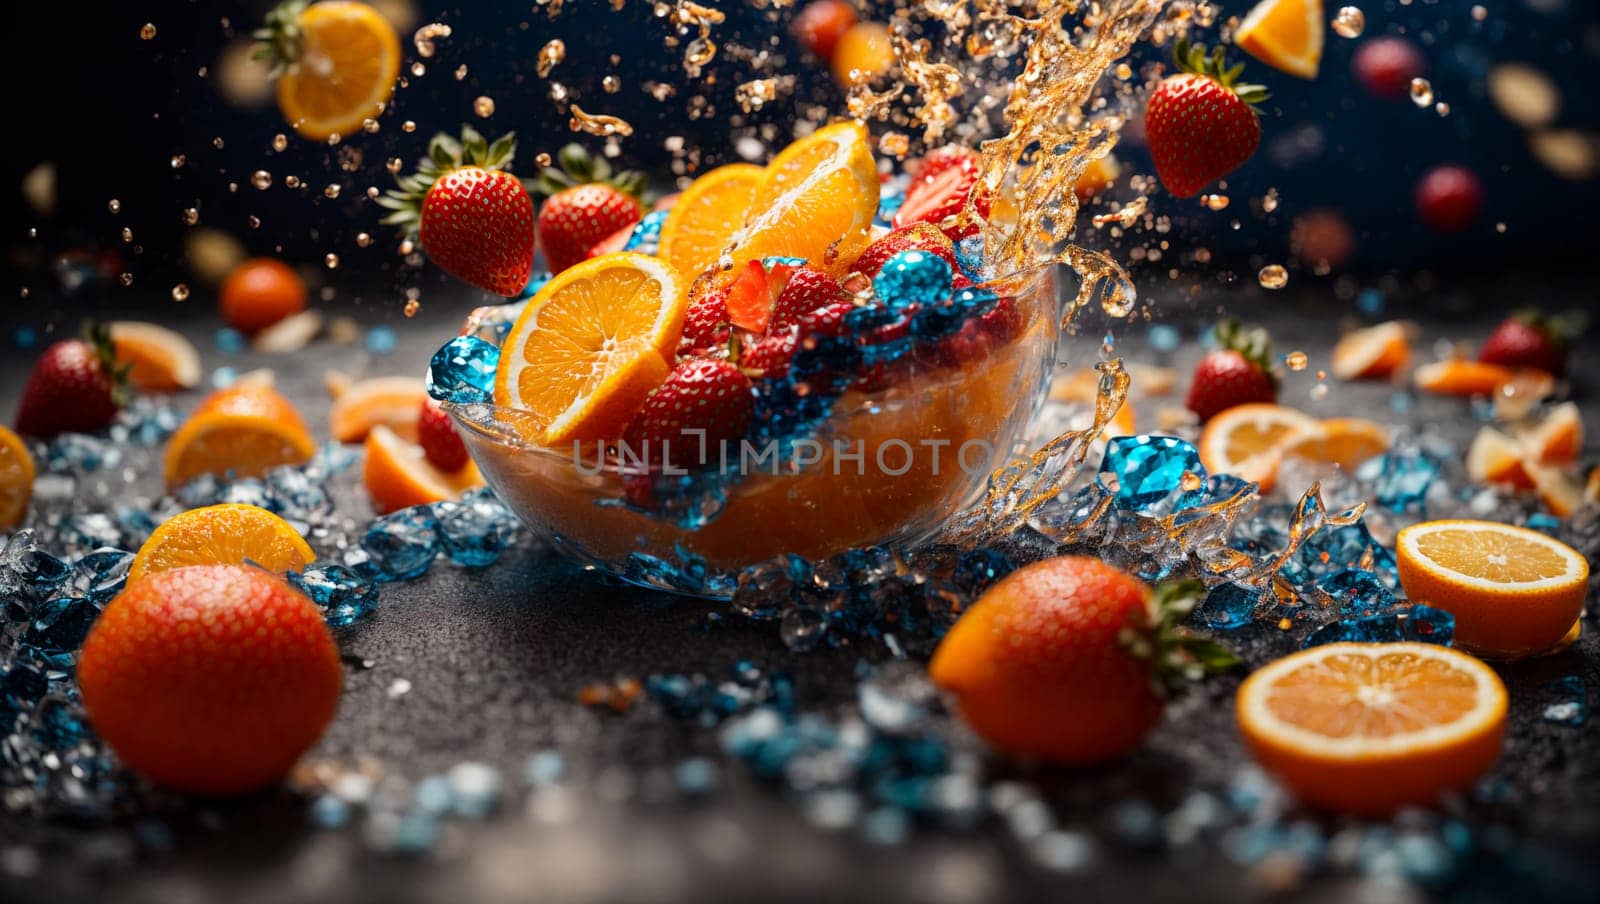 orange and strawberry float in the air, in splashes of water, on a deep dark blue background by Севостьянов